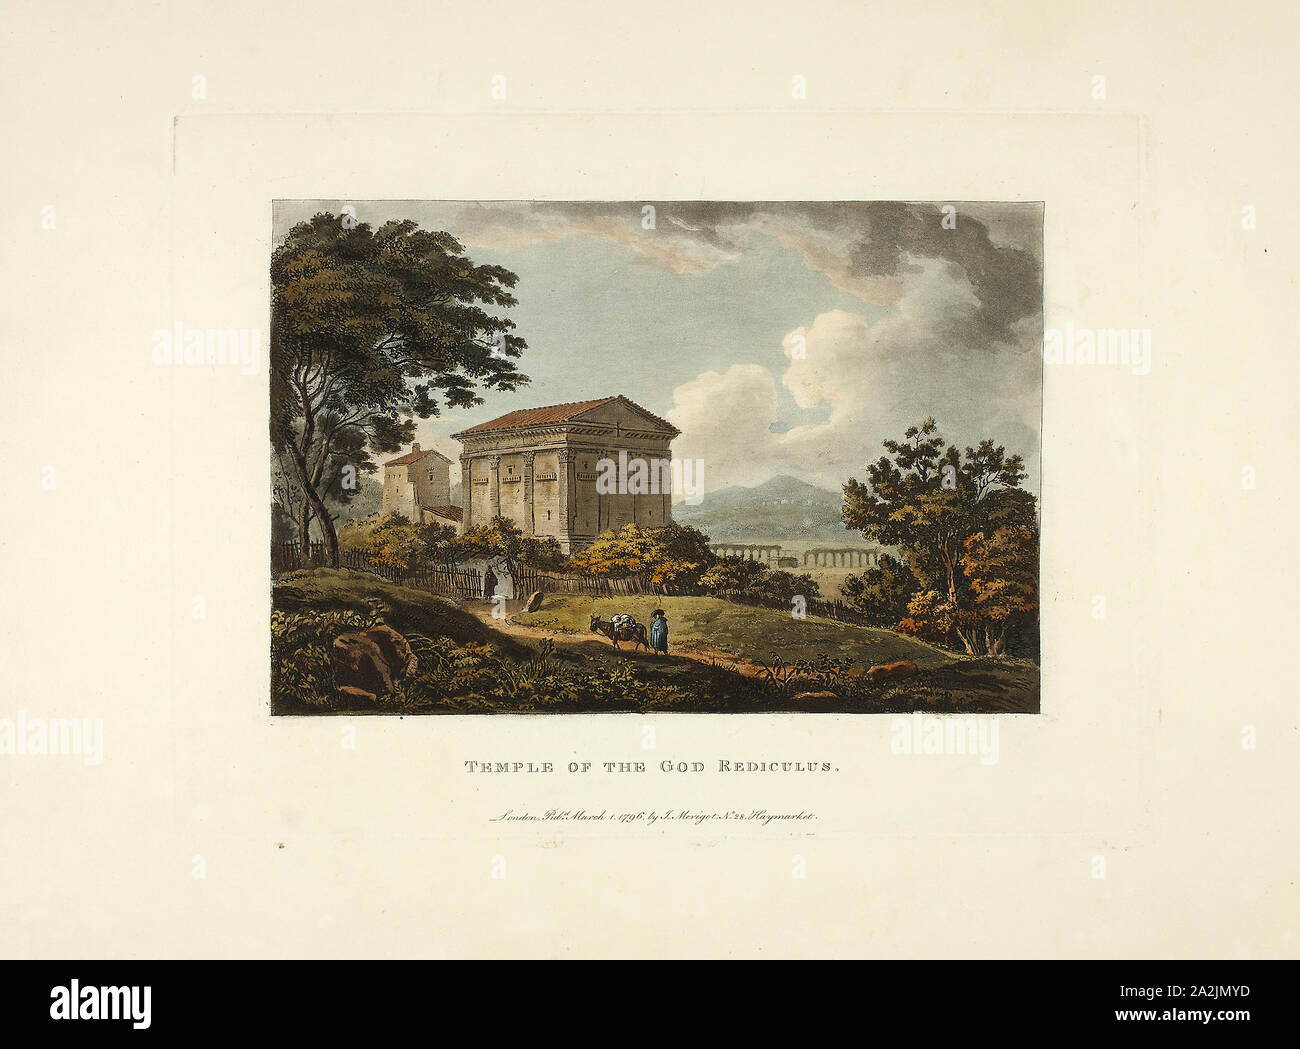 Temple of the God Rediculus, plate five from the Ruins of Rome Temple of the God Rediculus, plate five from the Ruins of Rome, published March 1, 1796, M. Dubourg, (English, active 1786-1838), published by J. Merigot (Italian, Unknown), England, Hand-colored aquatint on paper, 330 × 448 mm (sheet Stock Photo